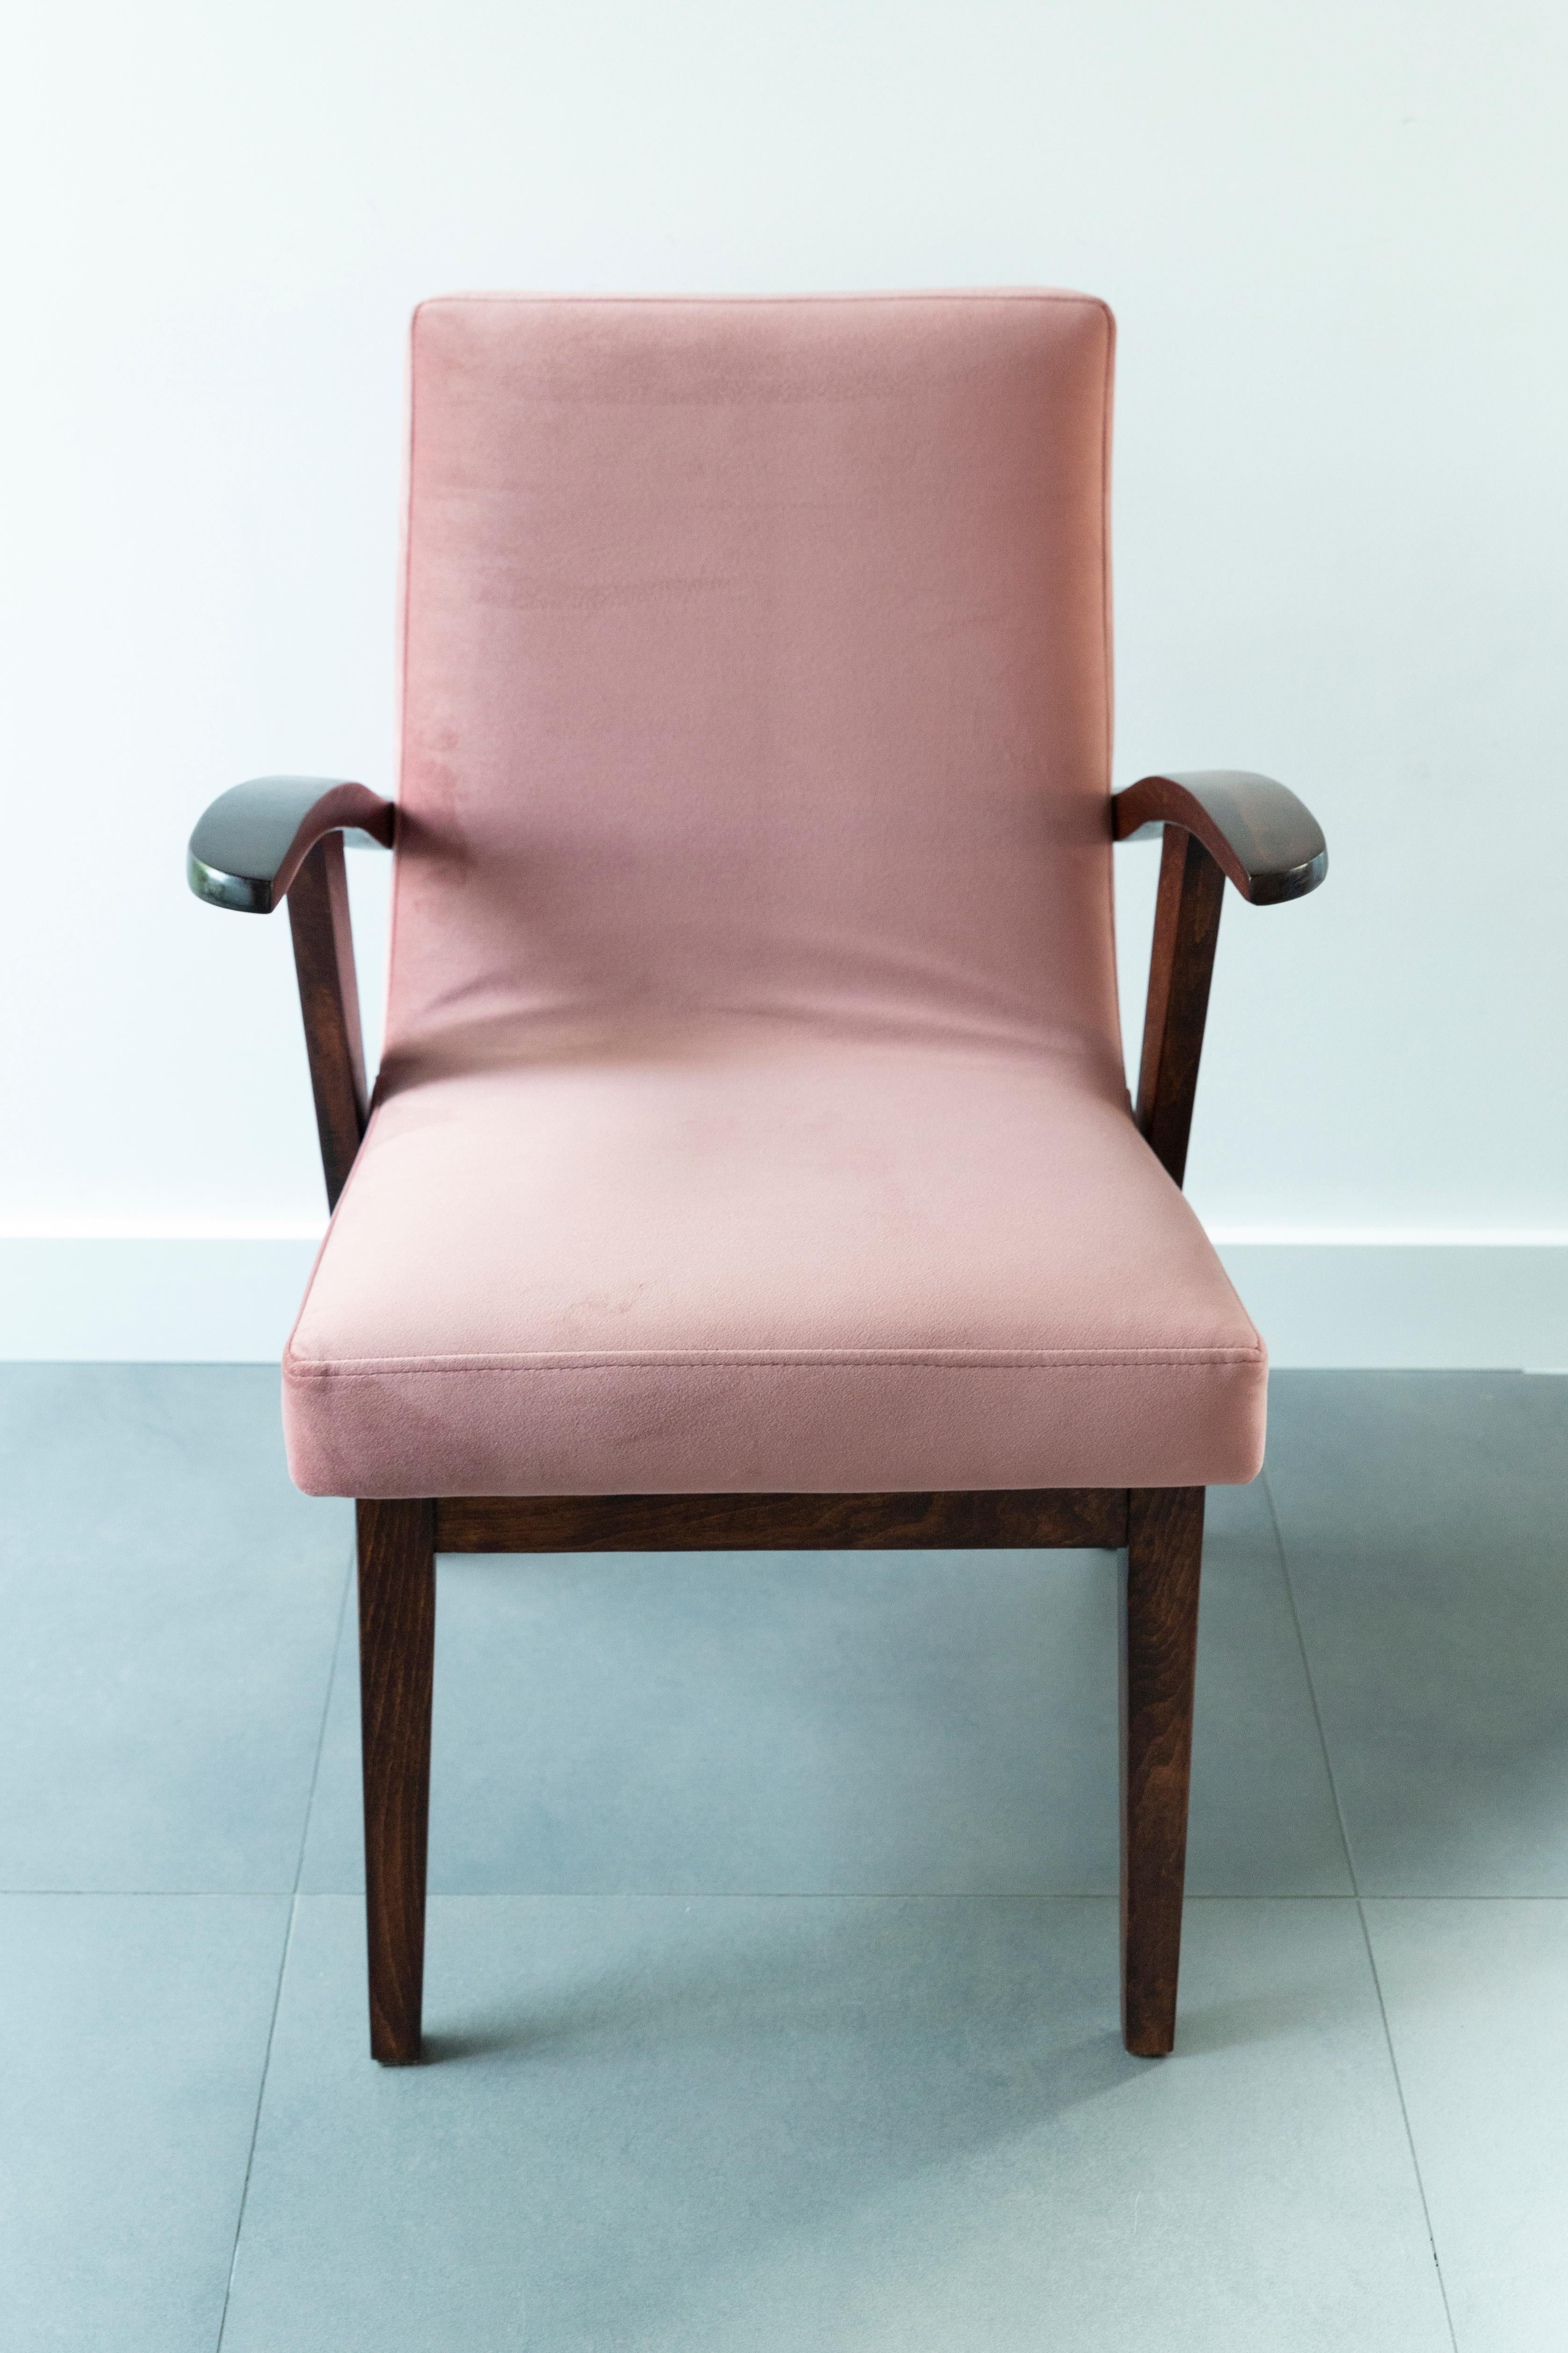 Twelve 20th Century Armchairs in Dusty Pink Velvet by Mieczyslaw Puchala, 1960s For Sale 5